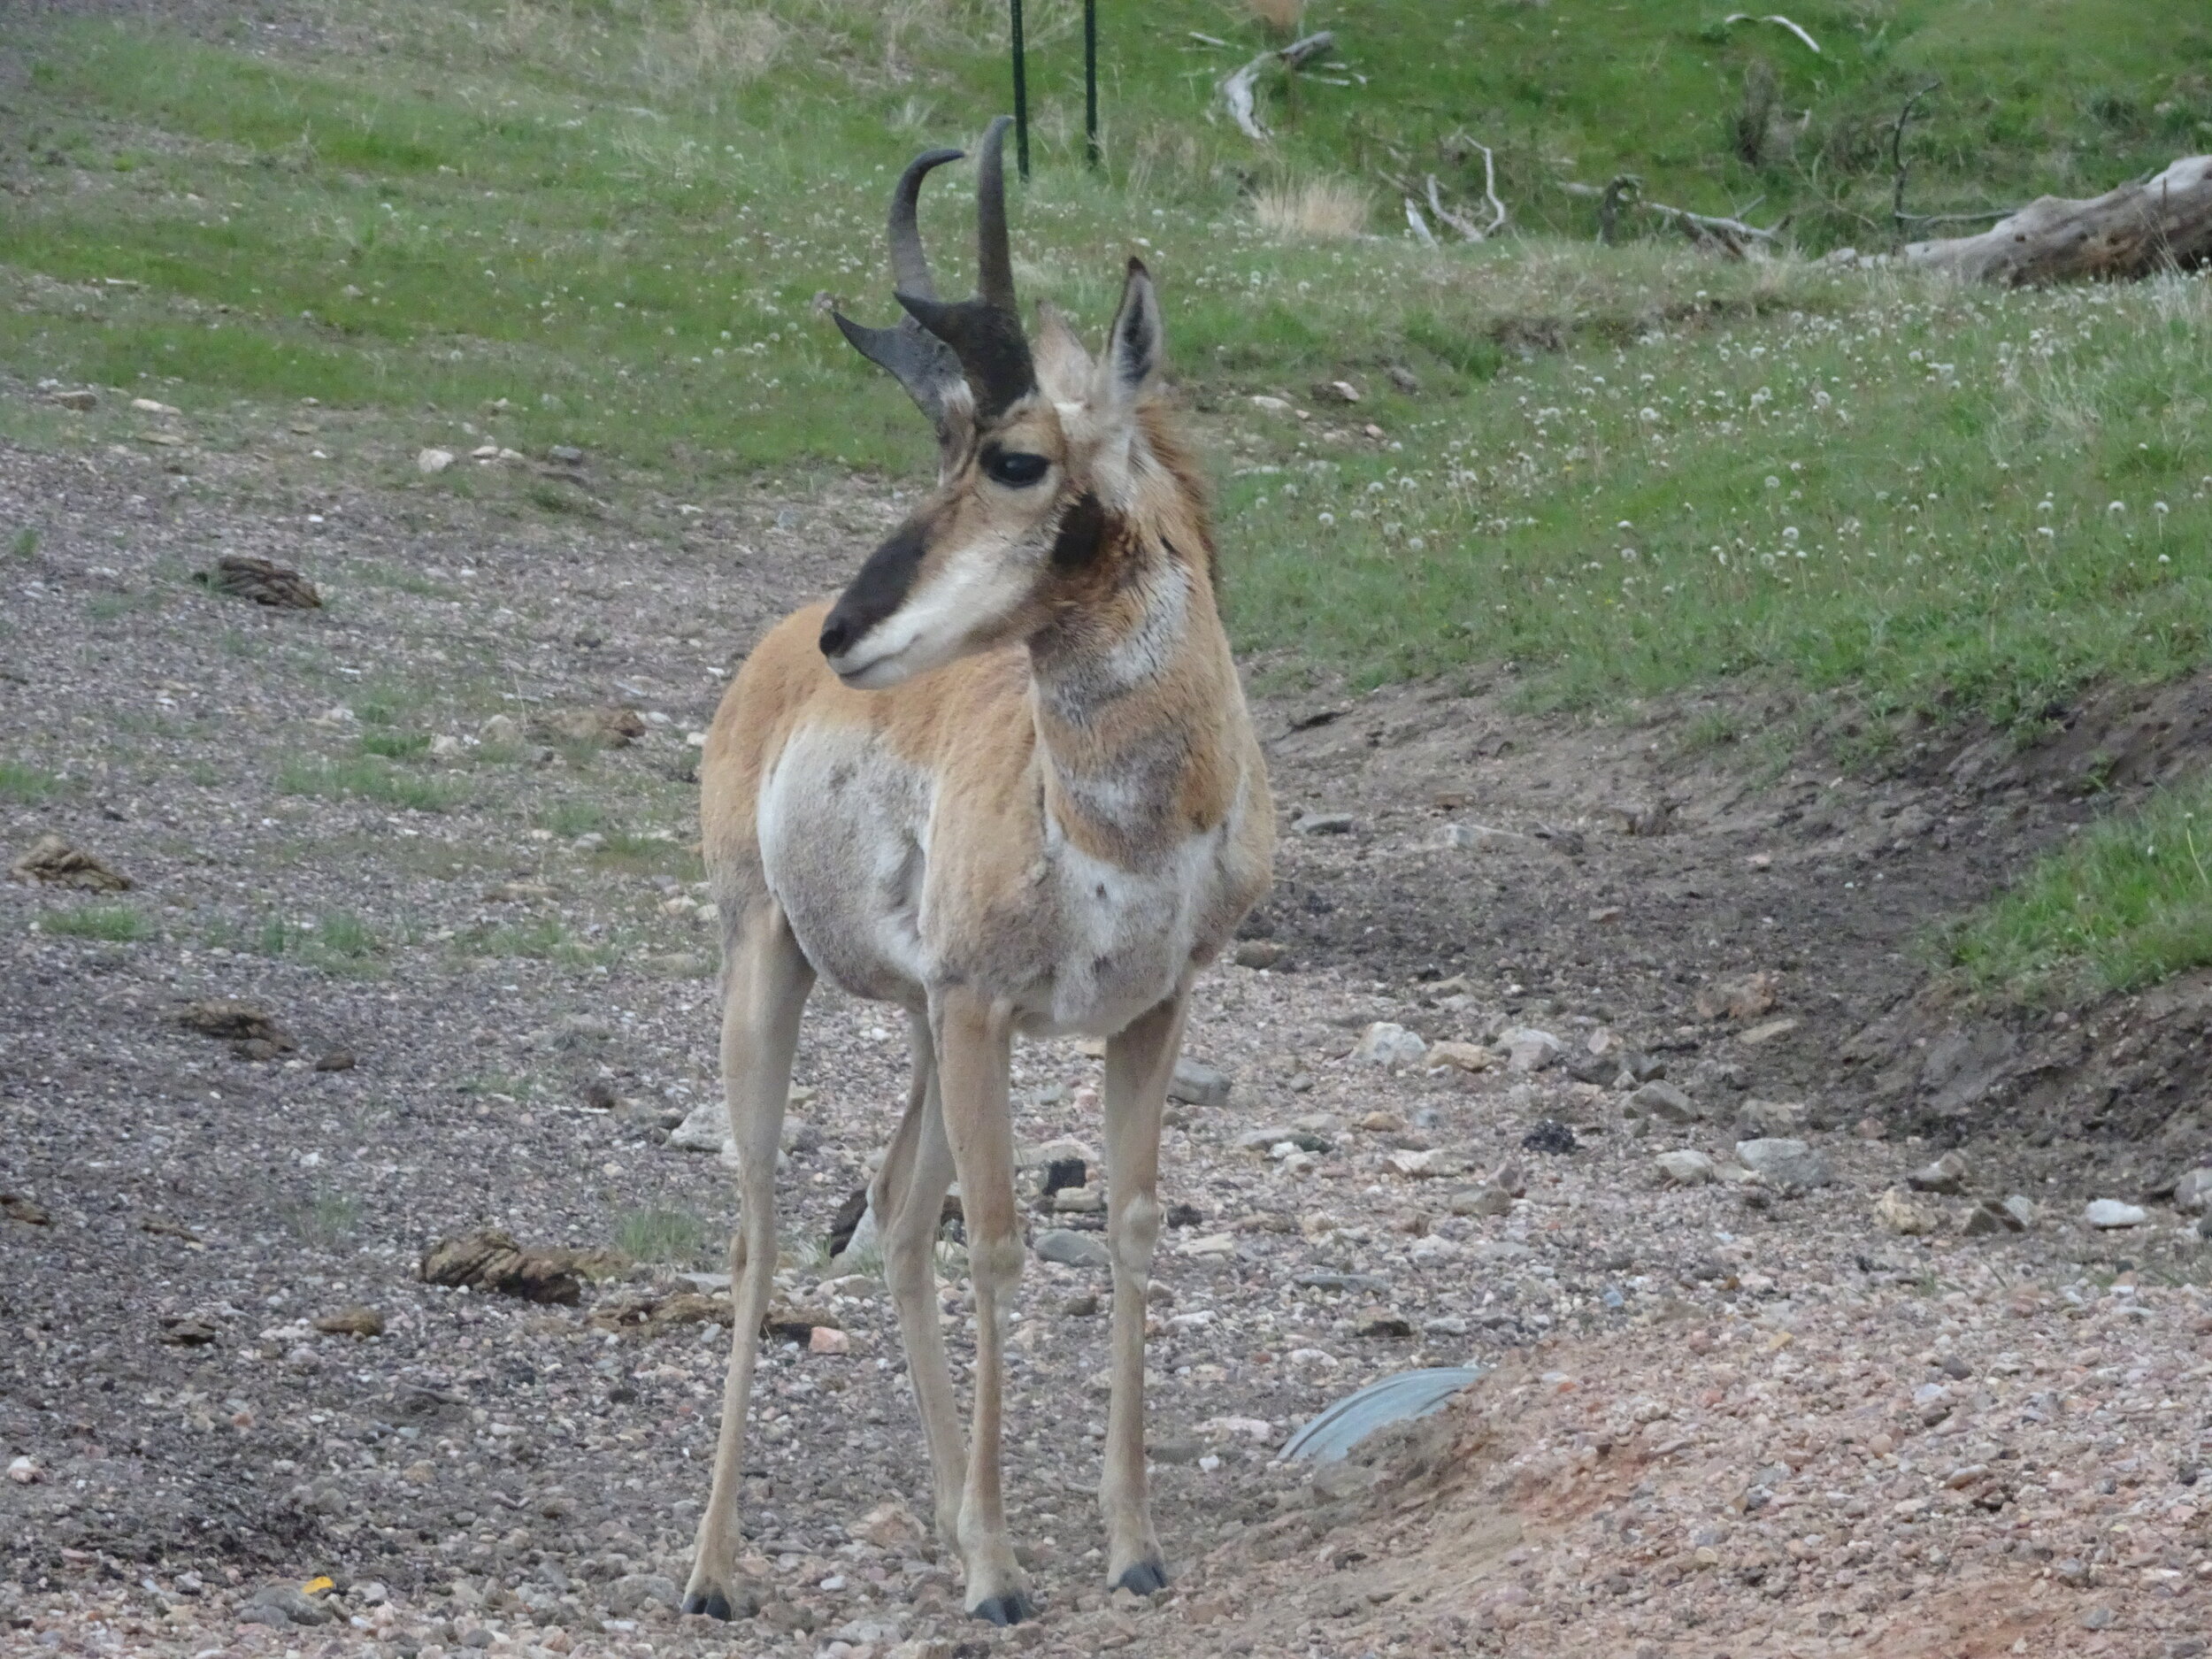 Majestic pronghorn right by our car on the Wildlife Loop in Custer State Park, SD.  Photo by Karen Boudreaux, May 26, 2021